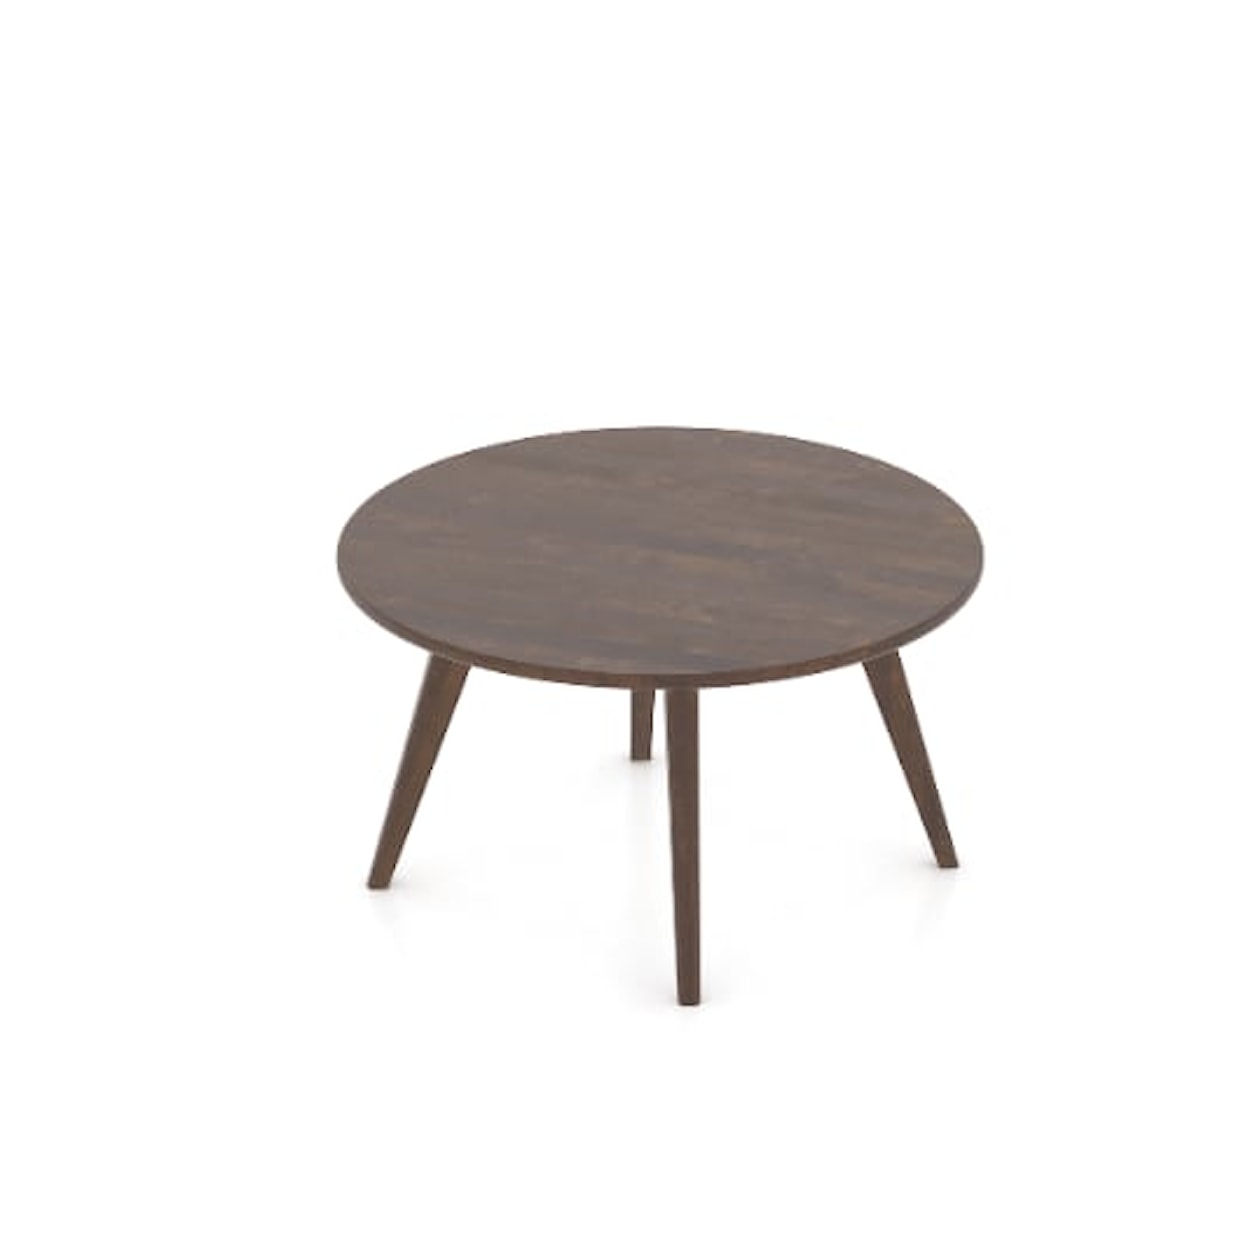 Canadel Canadel Living ROUND COFFEE TABLE 3030